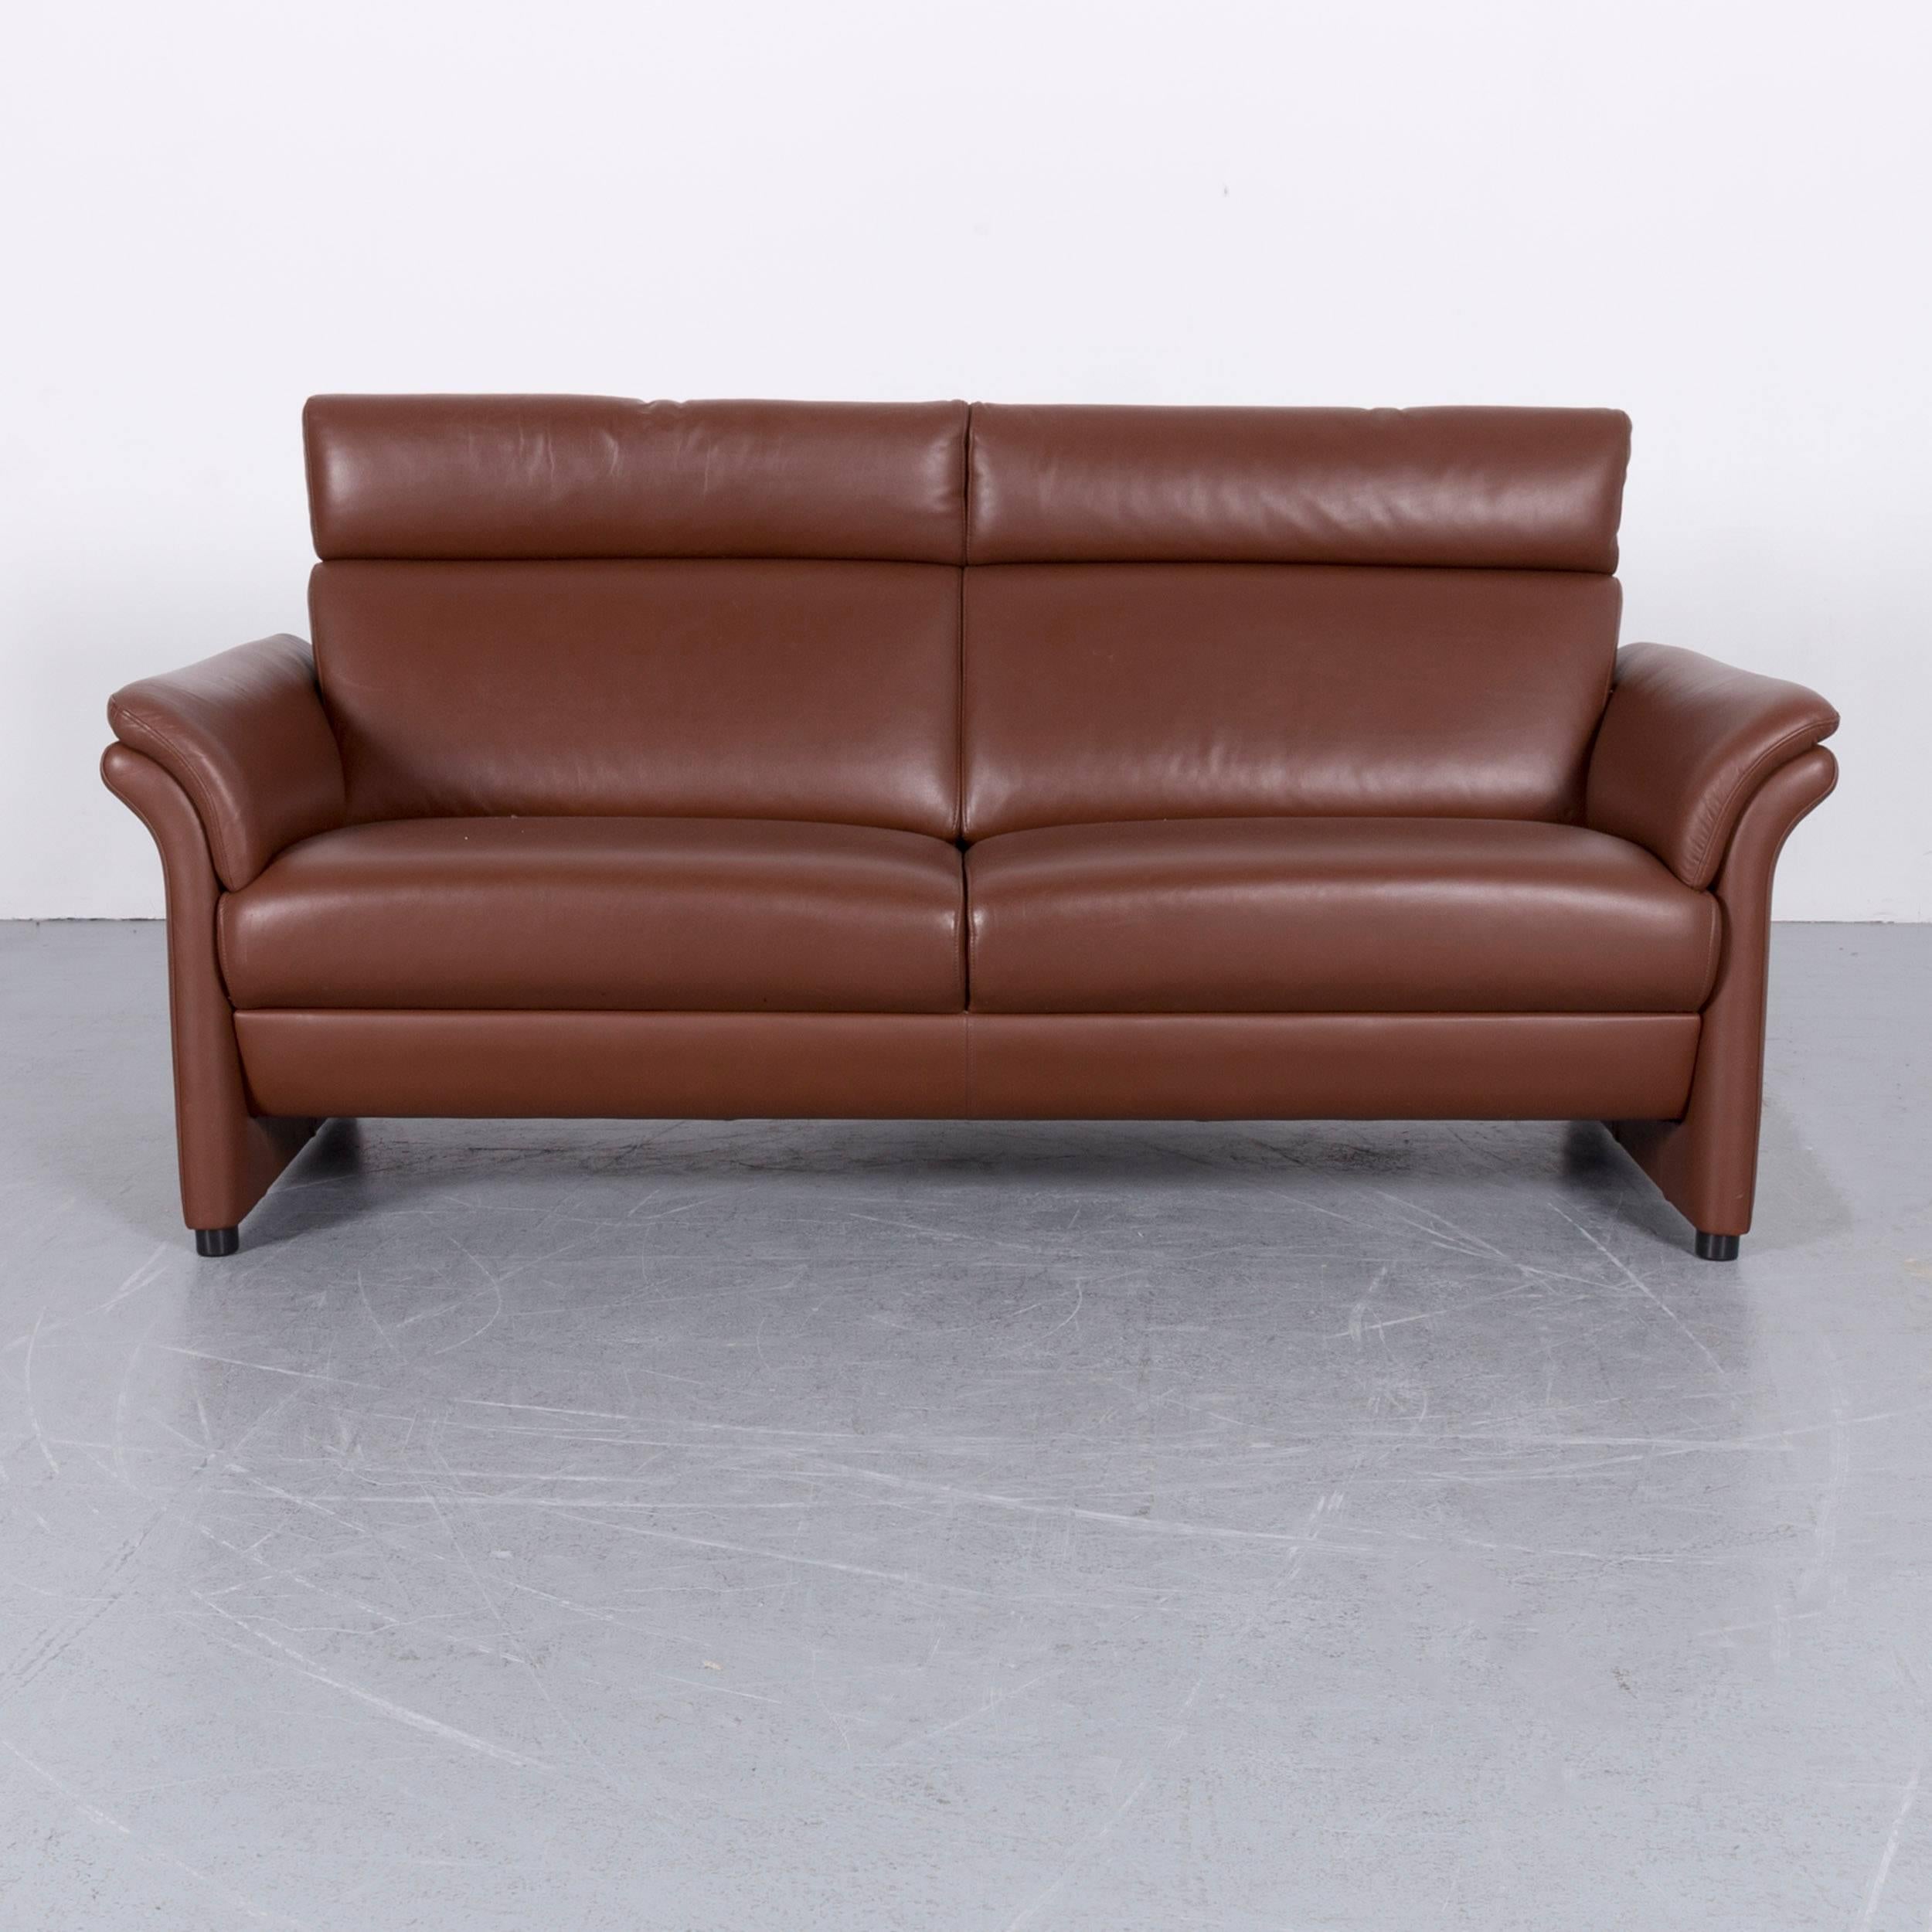 We bring to you an Himolla leather sofa set black three-seat two-seat.

































